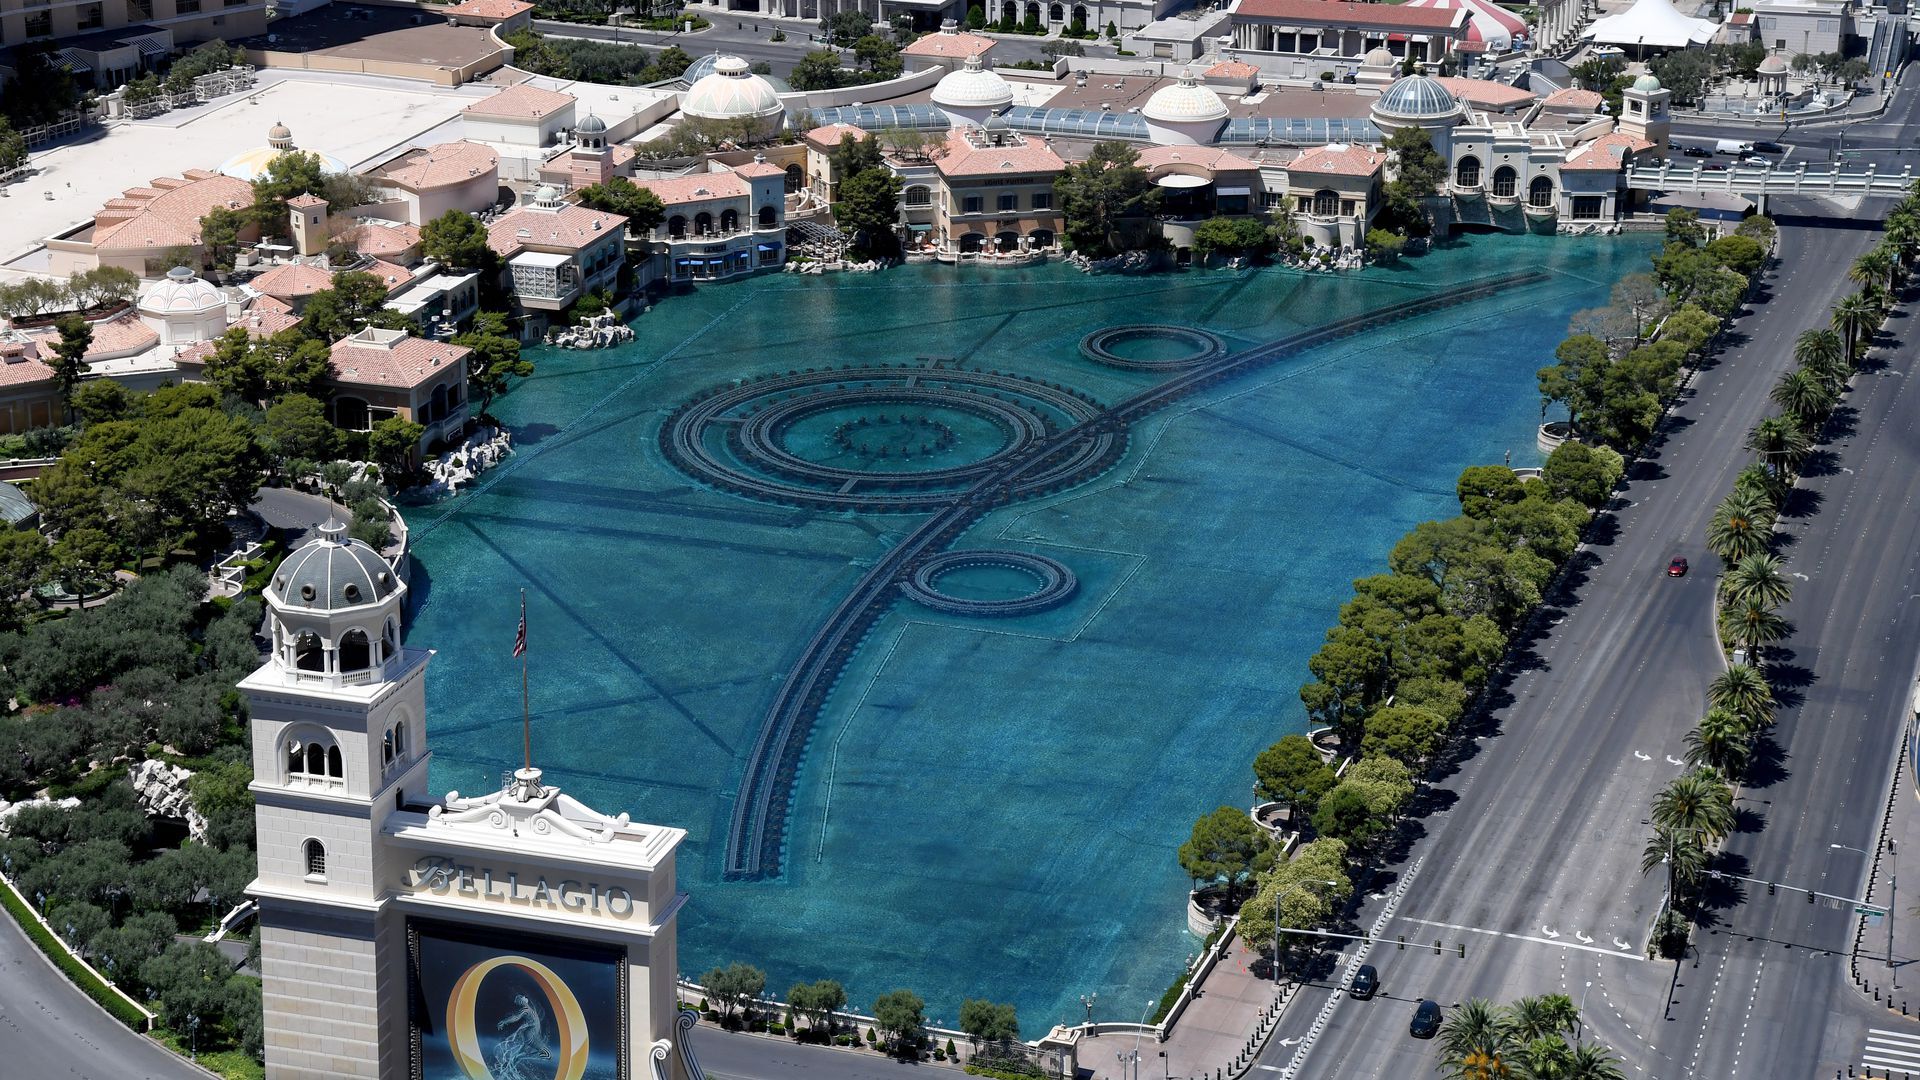 An aerial view shows the lake in front of the Bellagio in Vegas. Photo: Ethan Miller/Getty Images